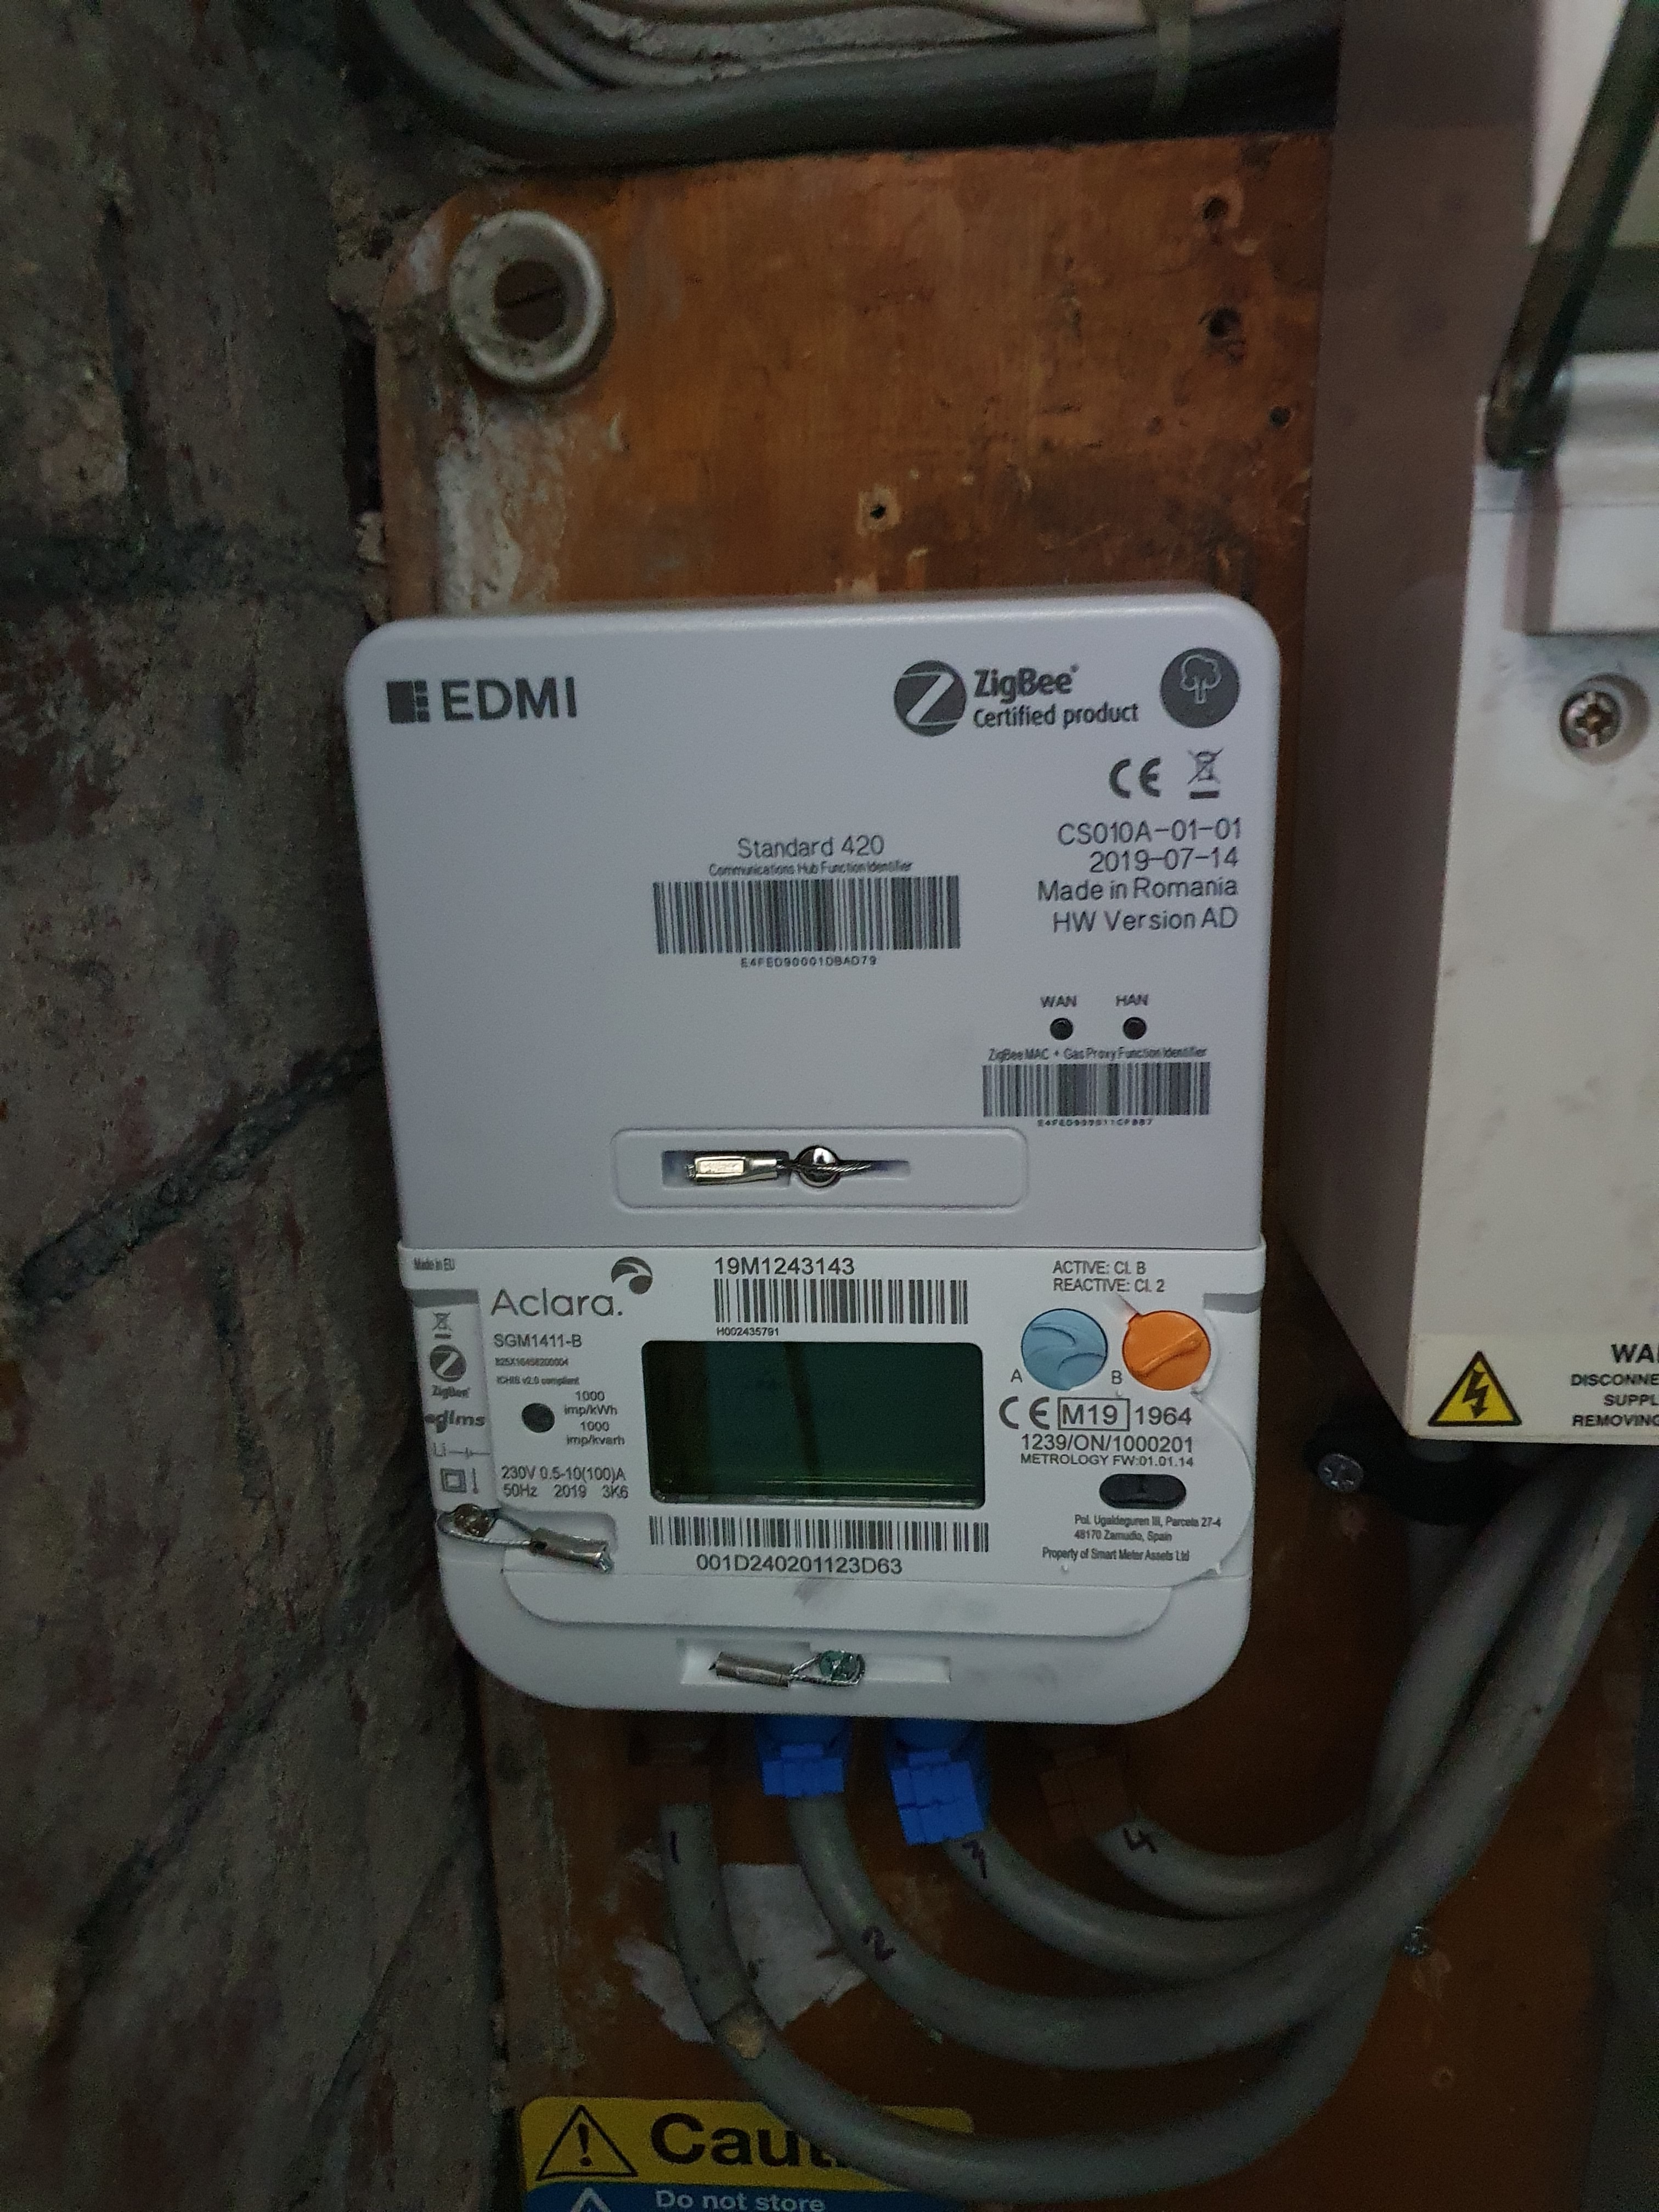 smart utility meter manufacturers grapevine tx